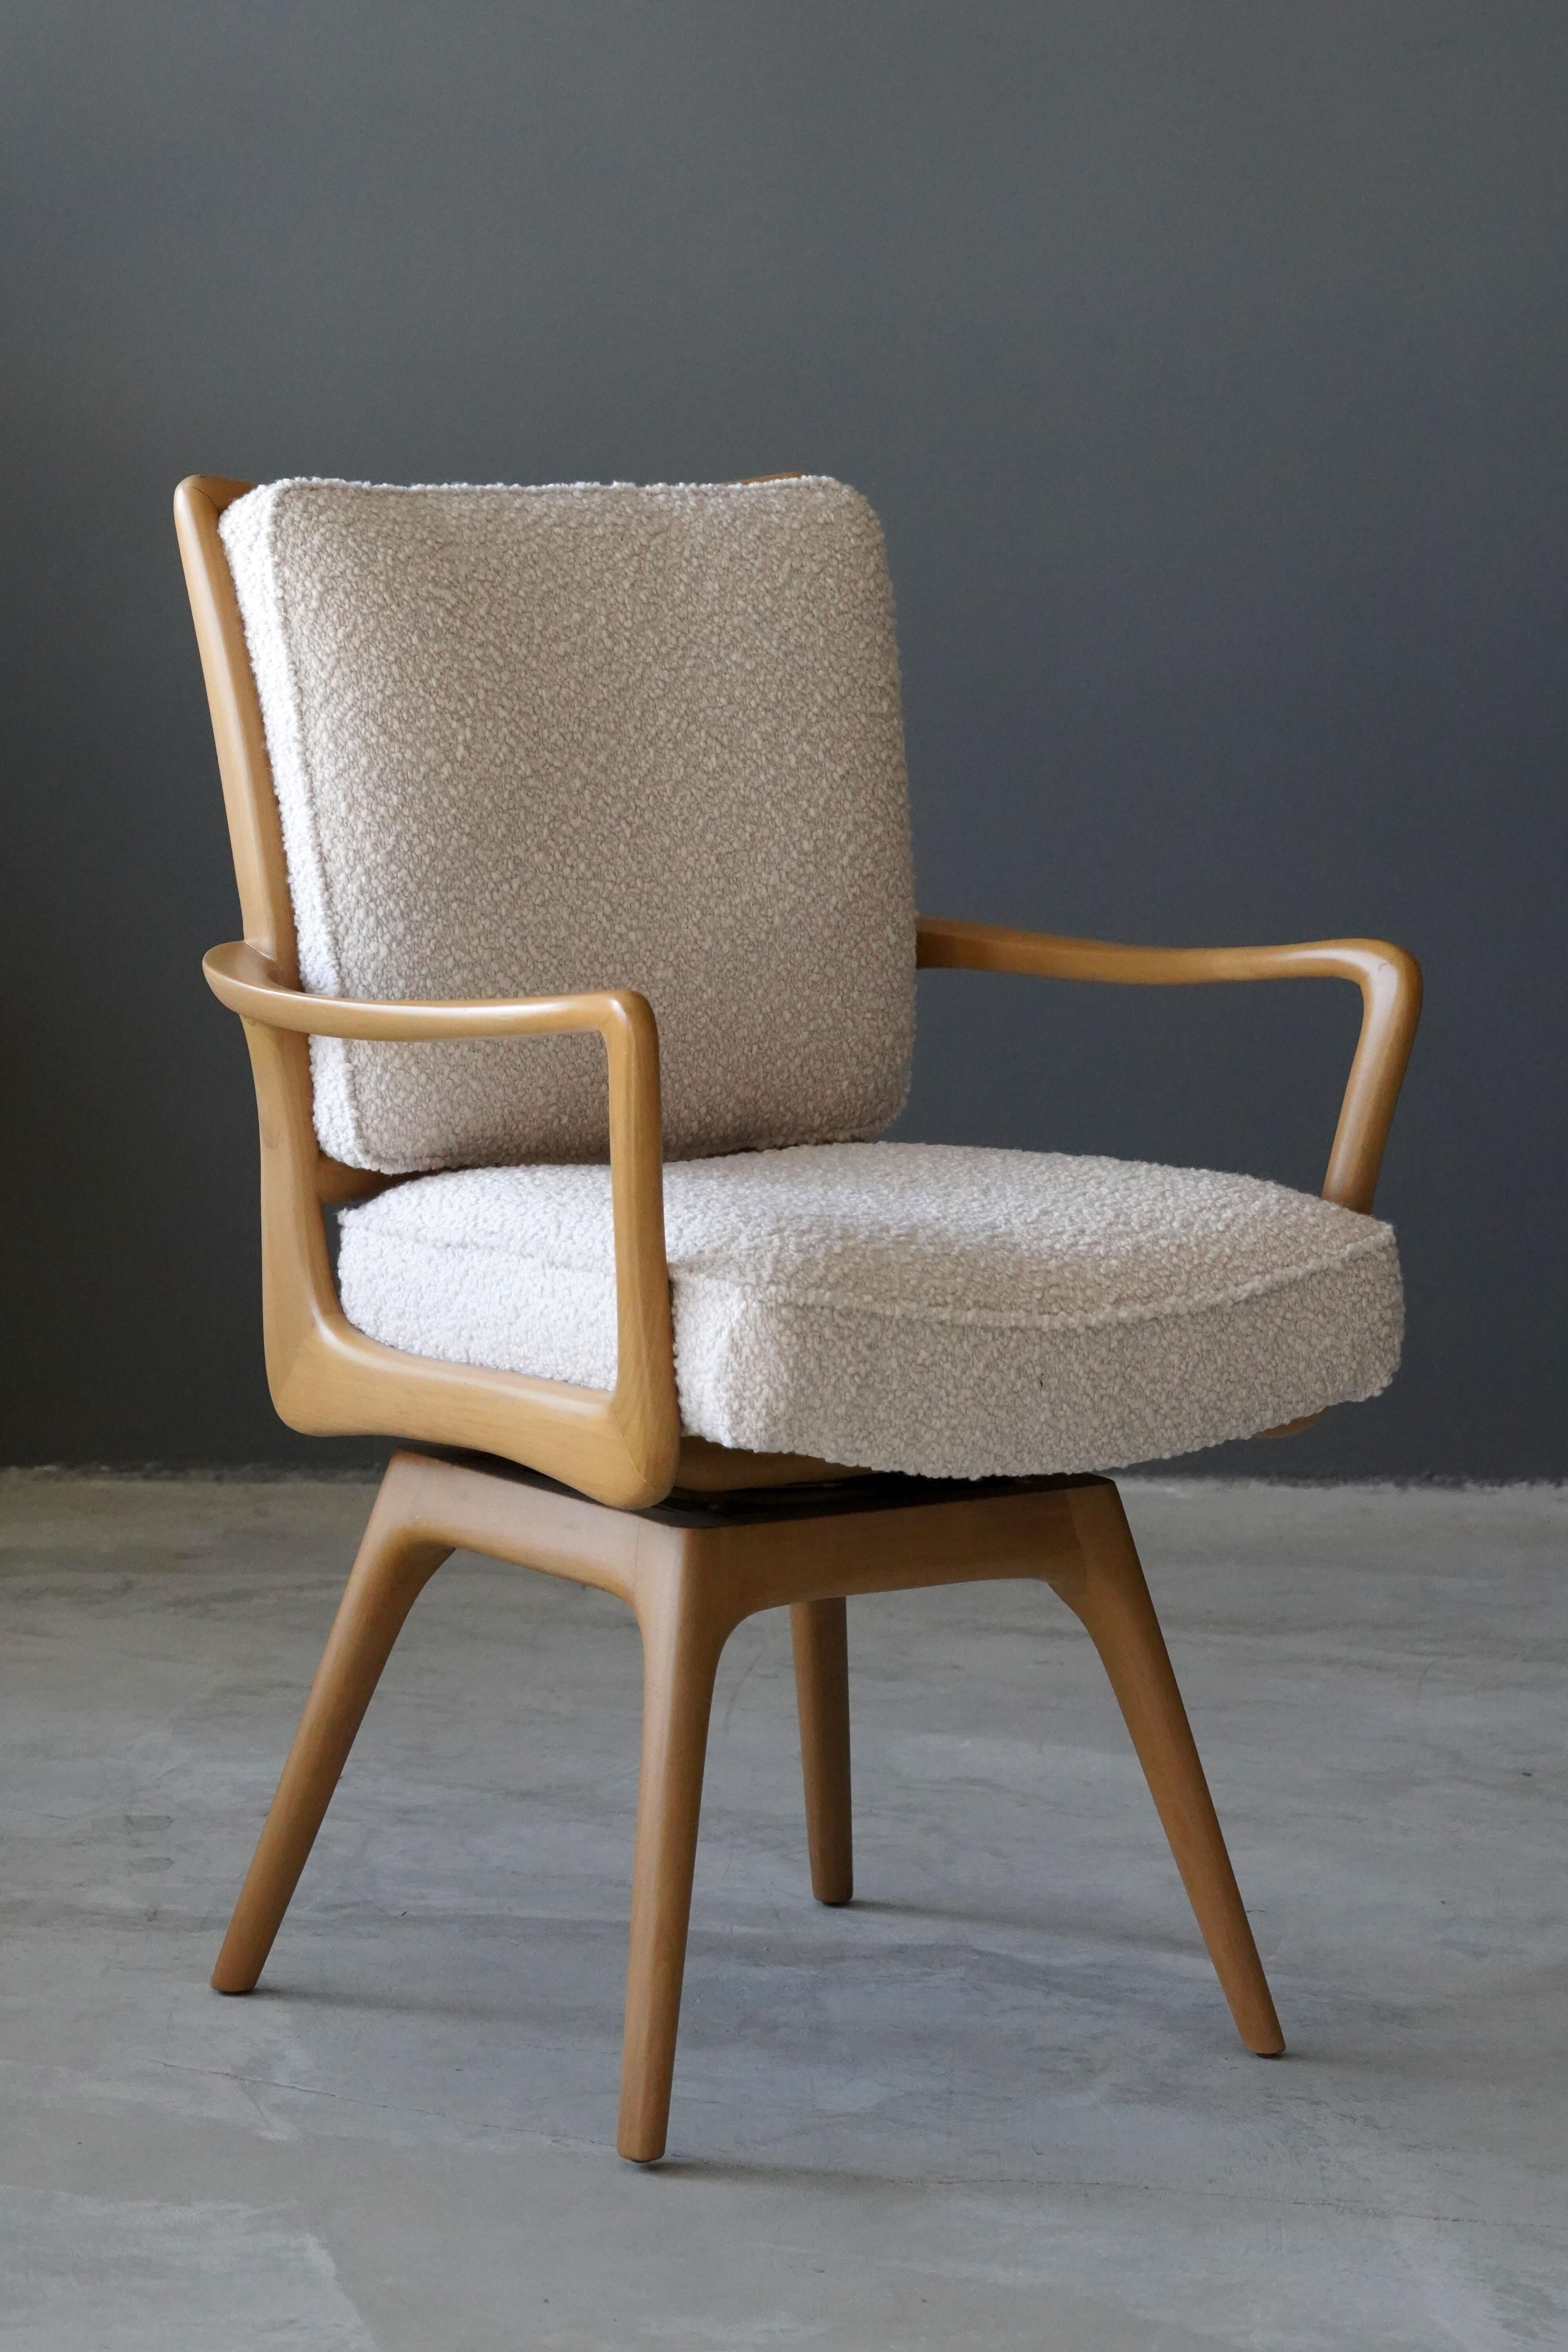 A swiveling organic armchair / desk chair designed by Vladimir Kagan. Organically carved wood is paired with a high-end bouclé fabric. Produced by Kagan-Dreyfus, 1960s. With label.

Other designers of the period include Paul Frankl, Gio Ponti,